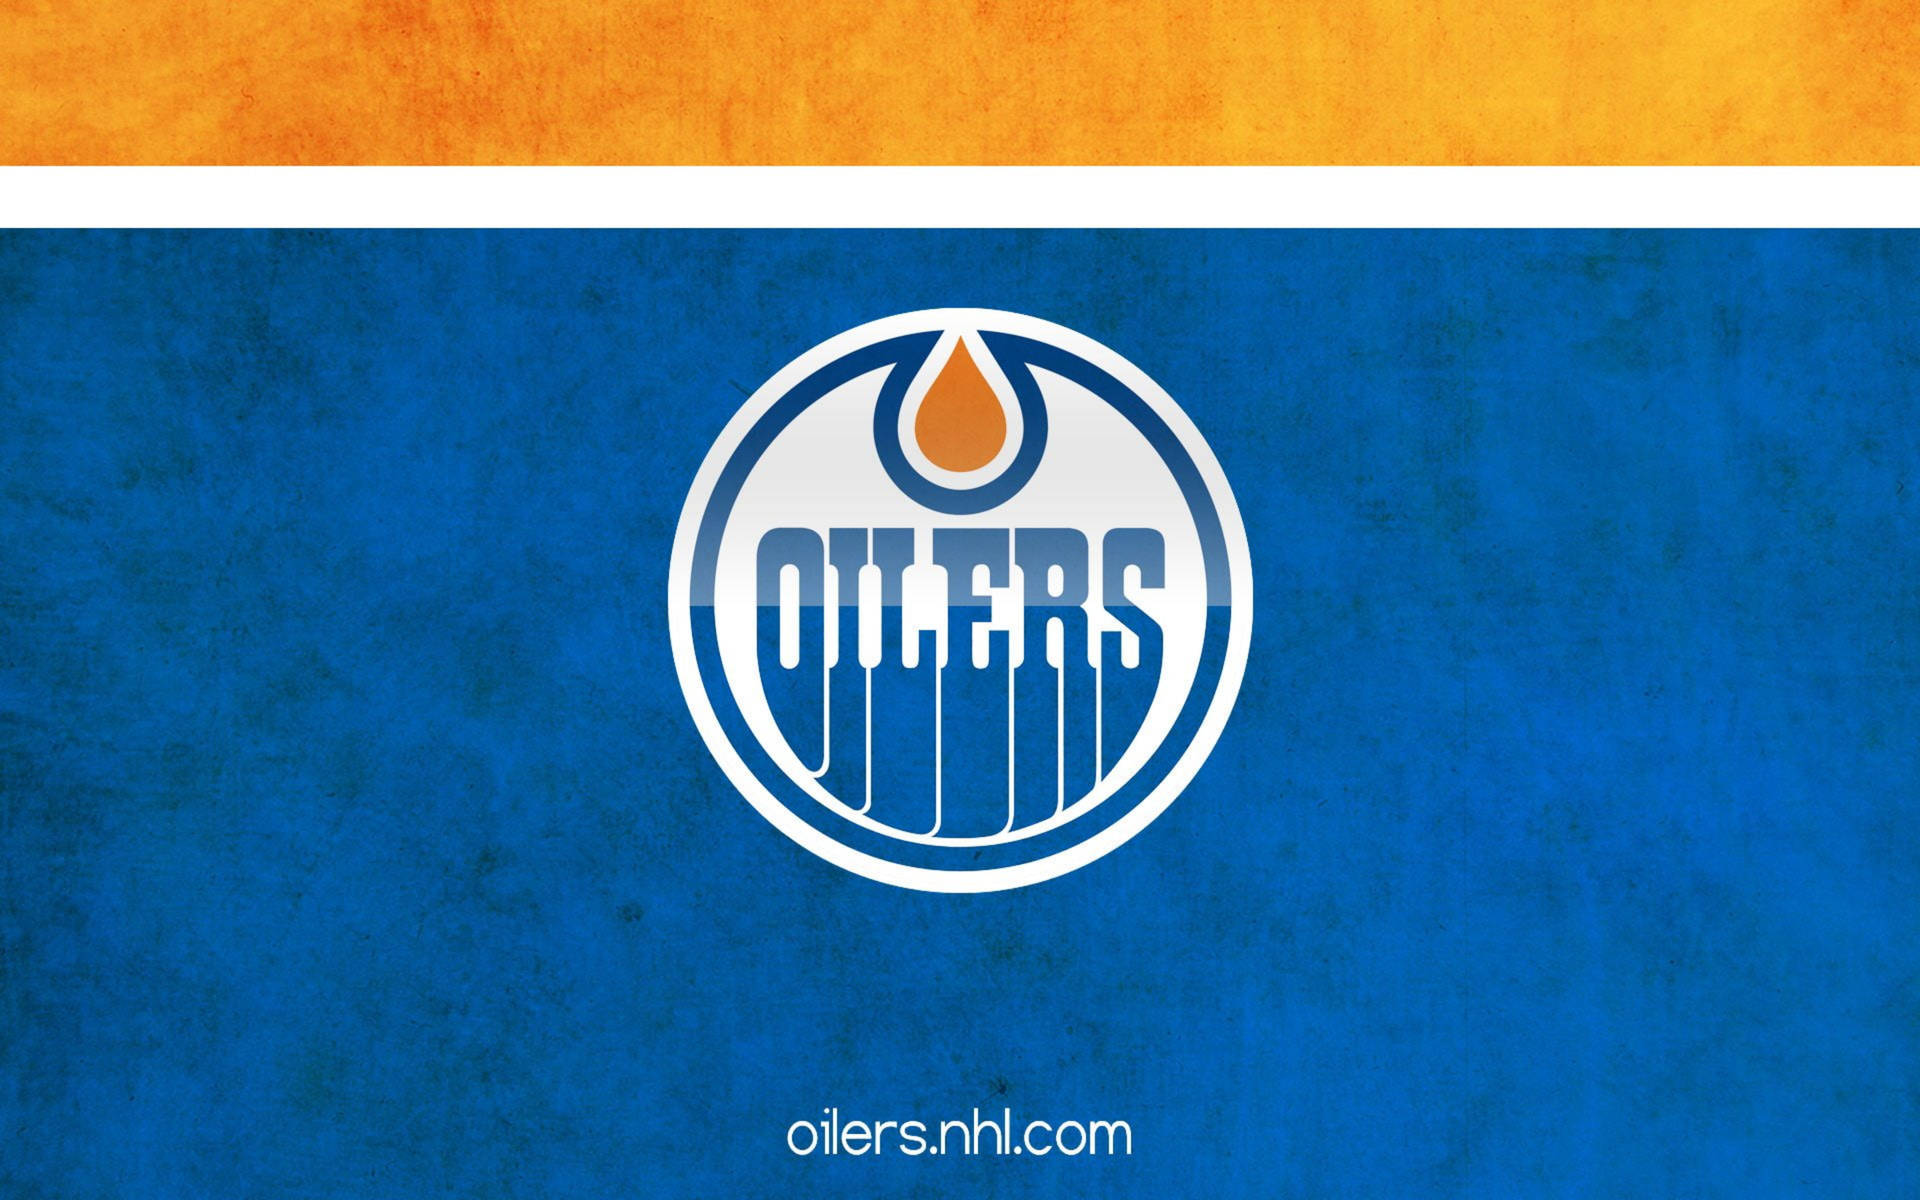 Edmonton Oilers In Action During A High Stakes Hockey Game Background